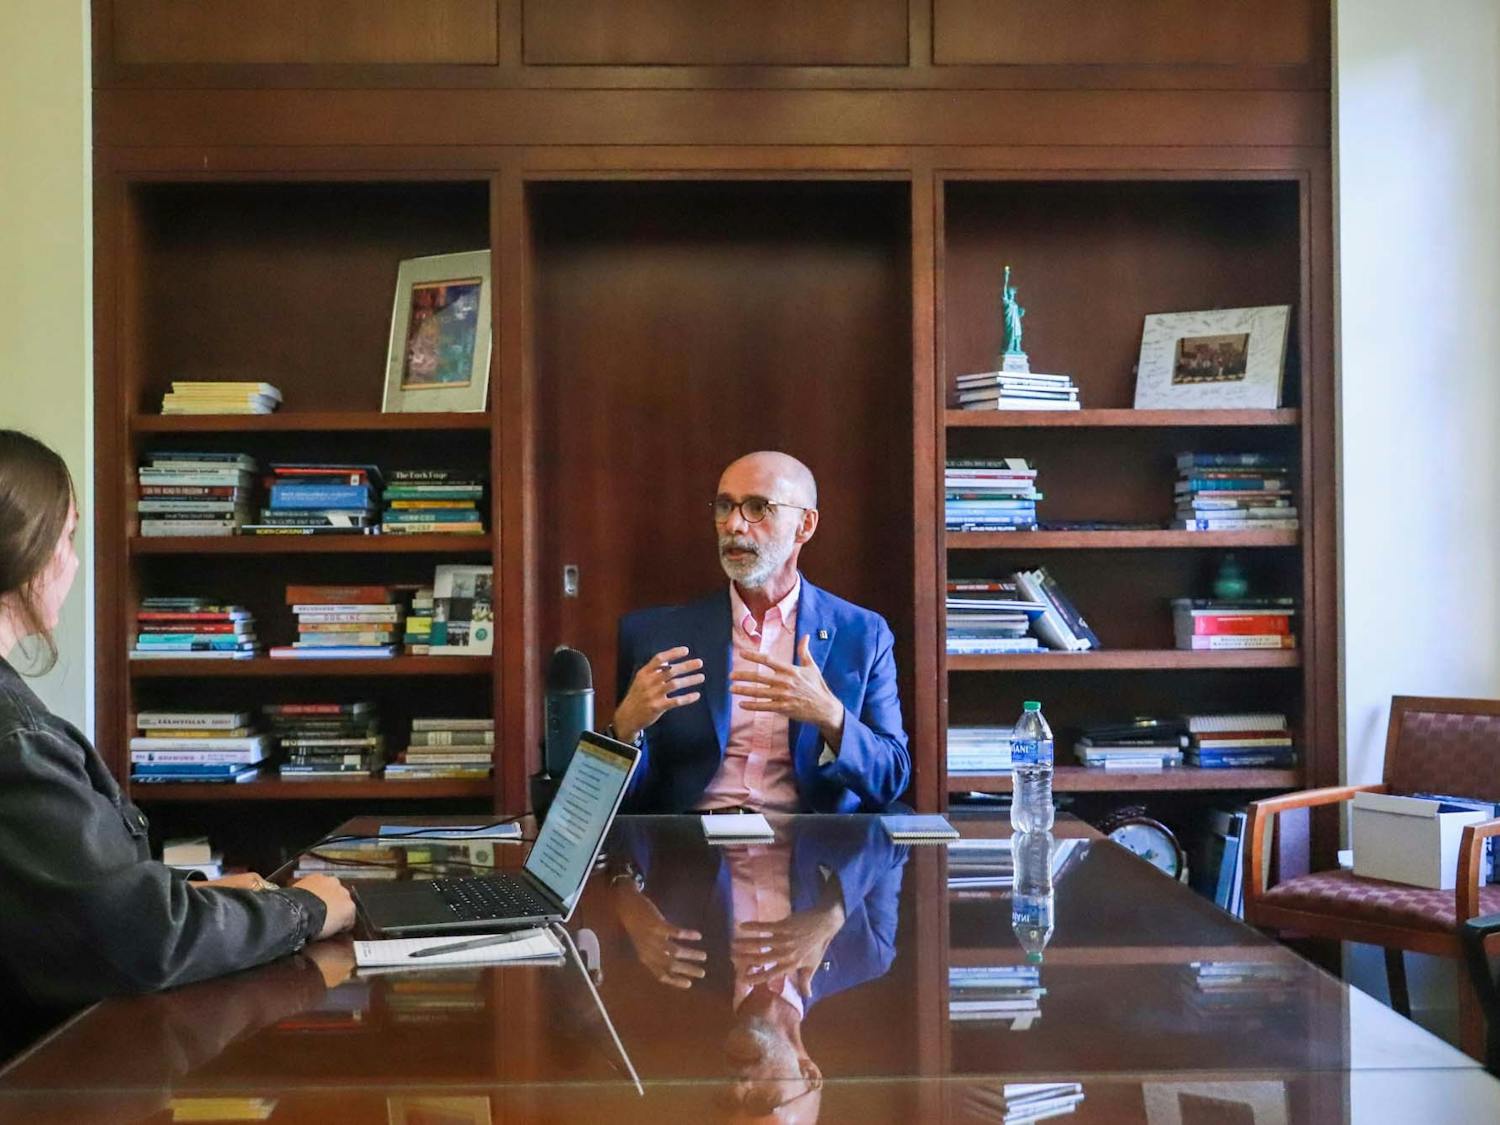 Raul Reis, the new Dean of the Hussman School of Journalism and Media, is interviewed by Liv Reilly in the Dean’s Suite on September 1, 2022.